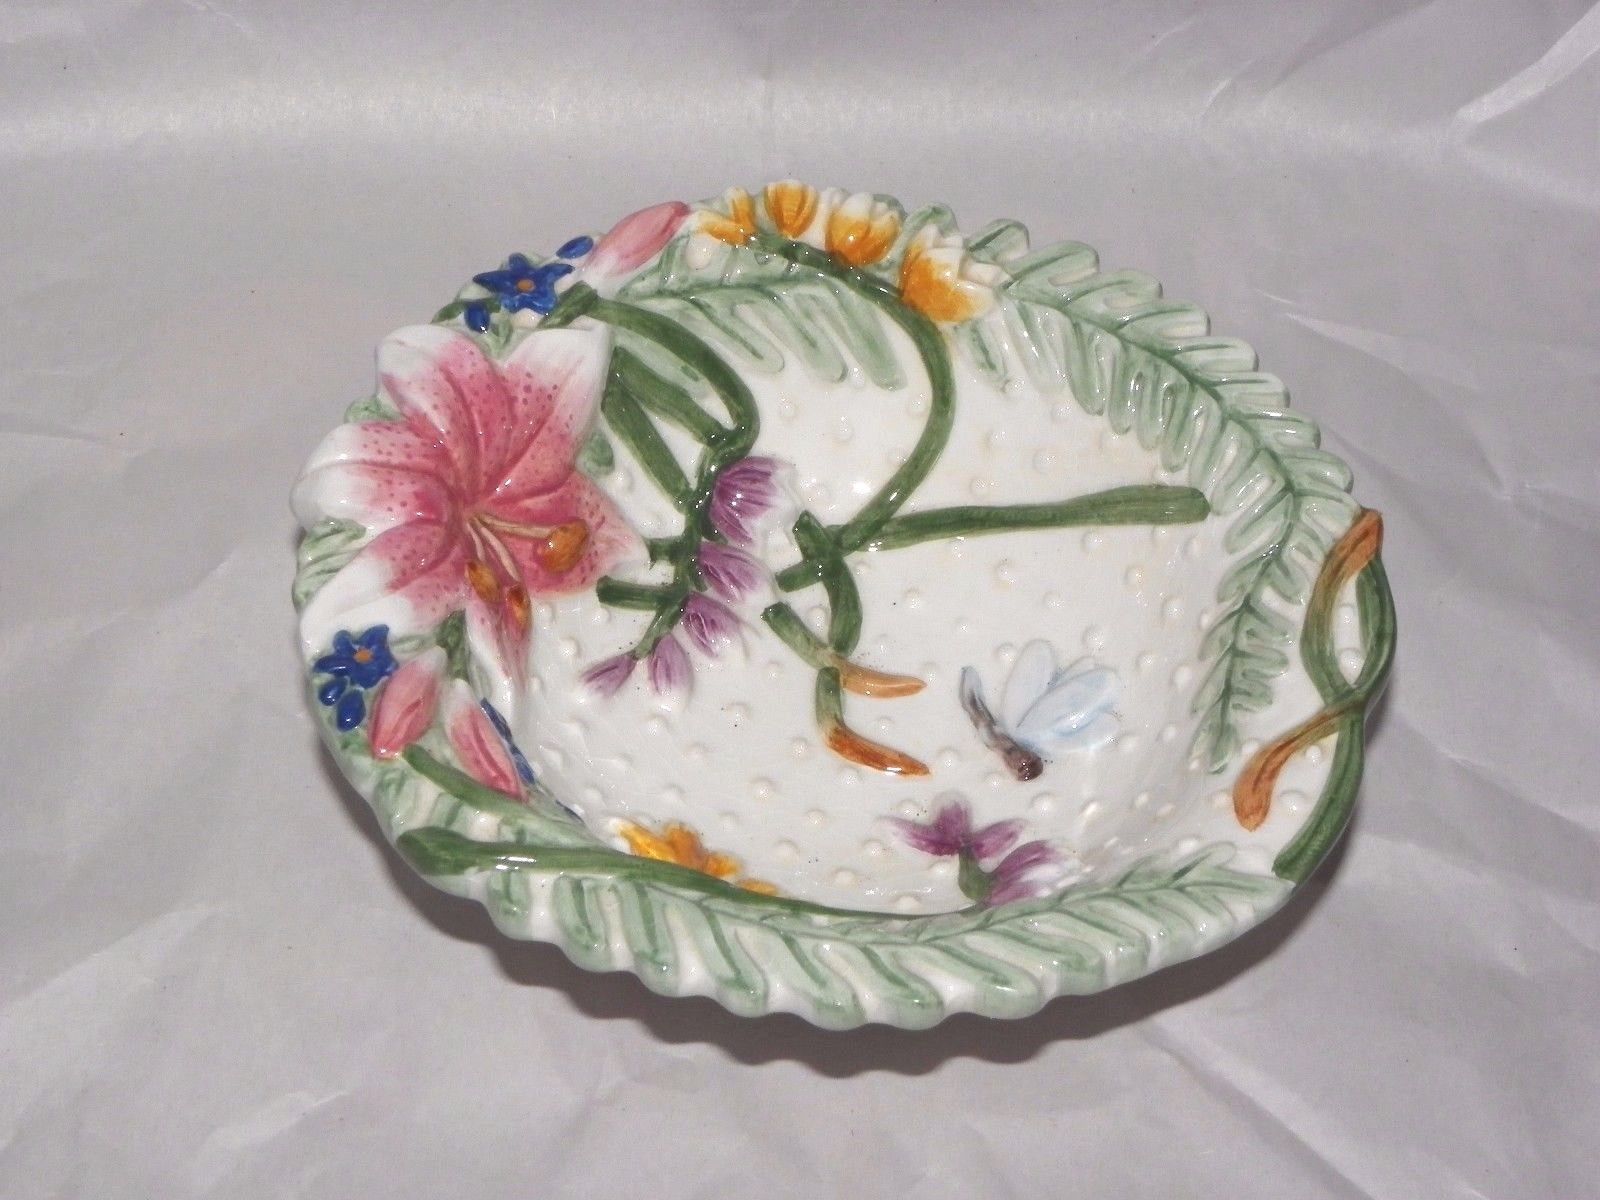 Potpourri colorful floral embossed 6 3/4” bowl by Fitz and Floyd Home Fragrance - $9.89